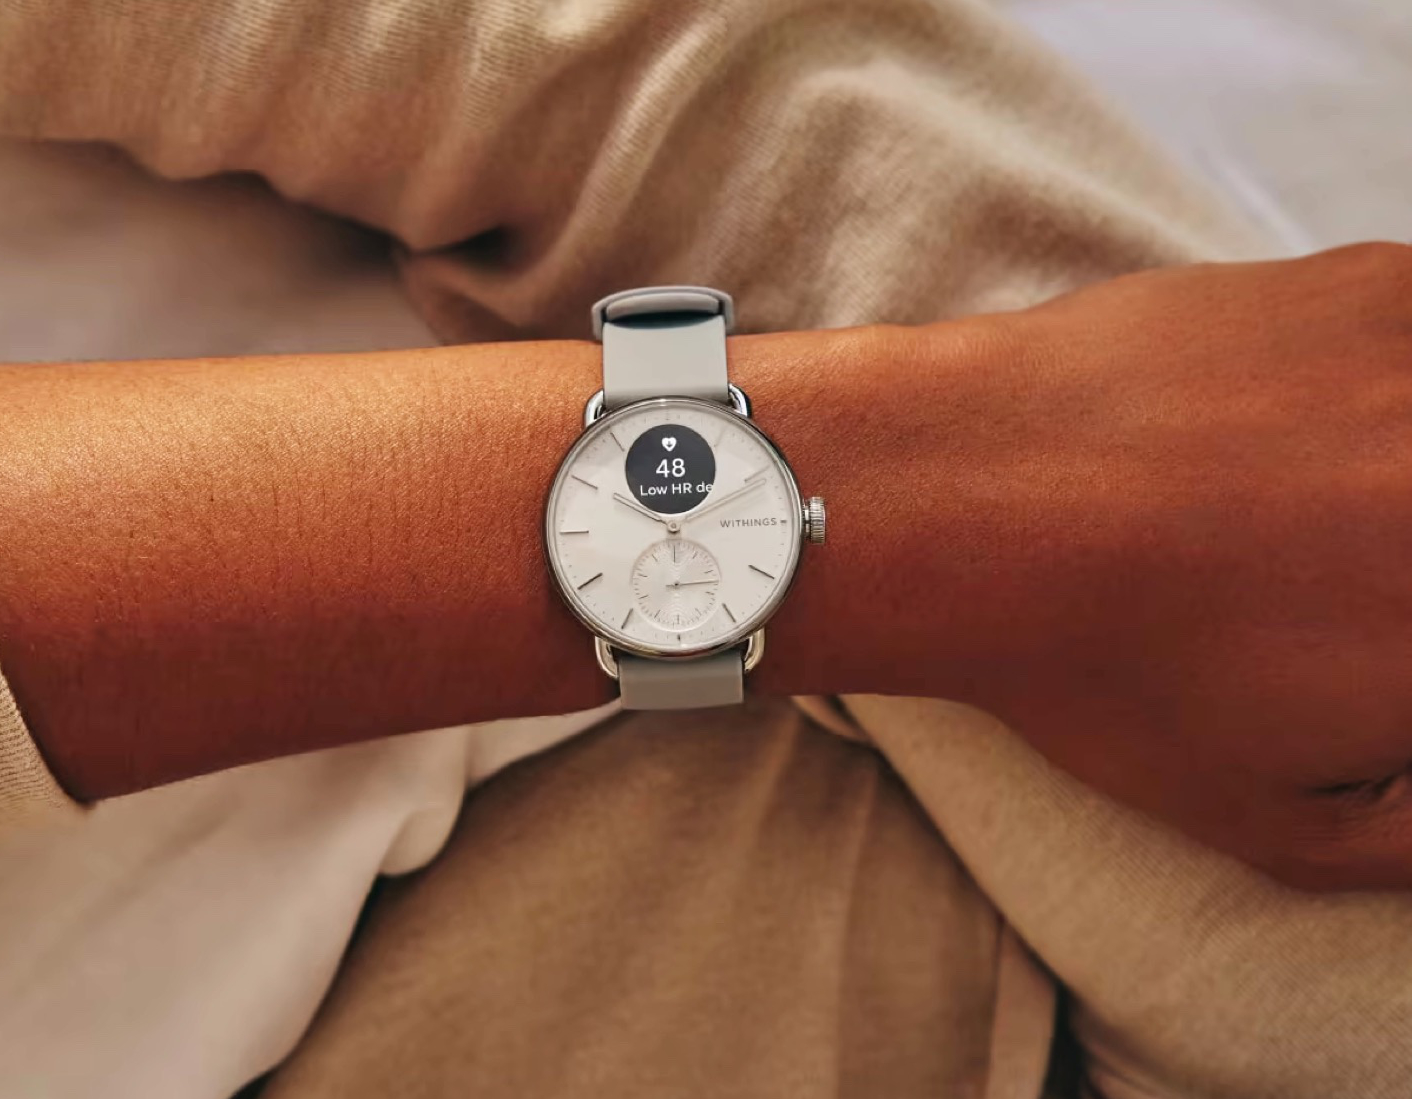 Withings ScanWatch 2 unveiled with ECG, skin temperature sensor and up to  30 days of battery life -  News